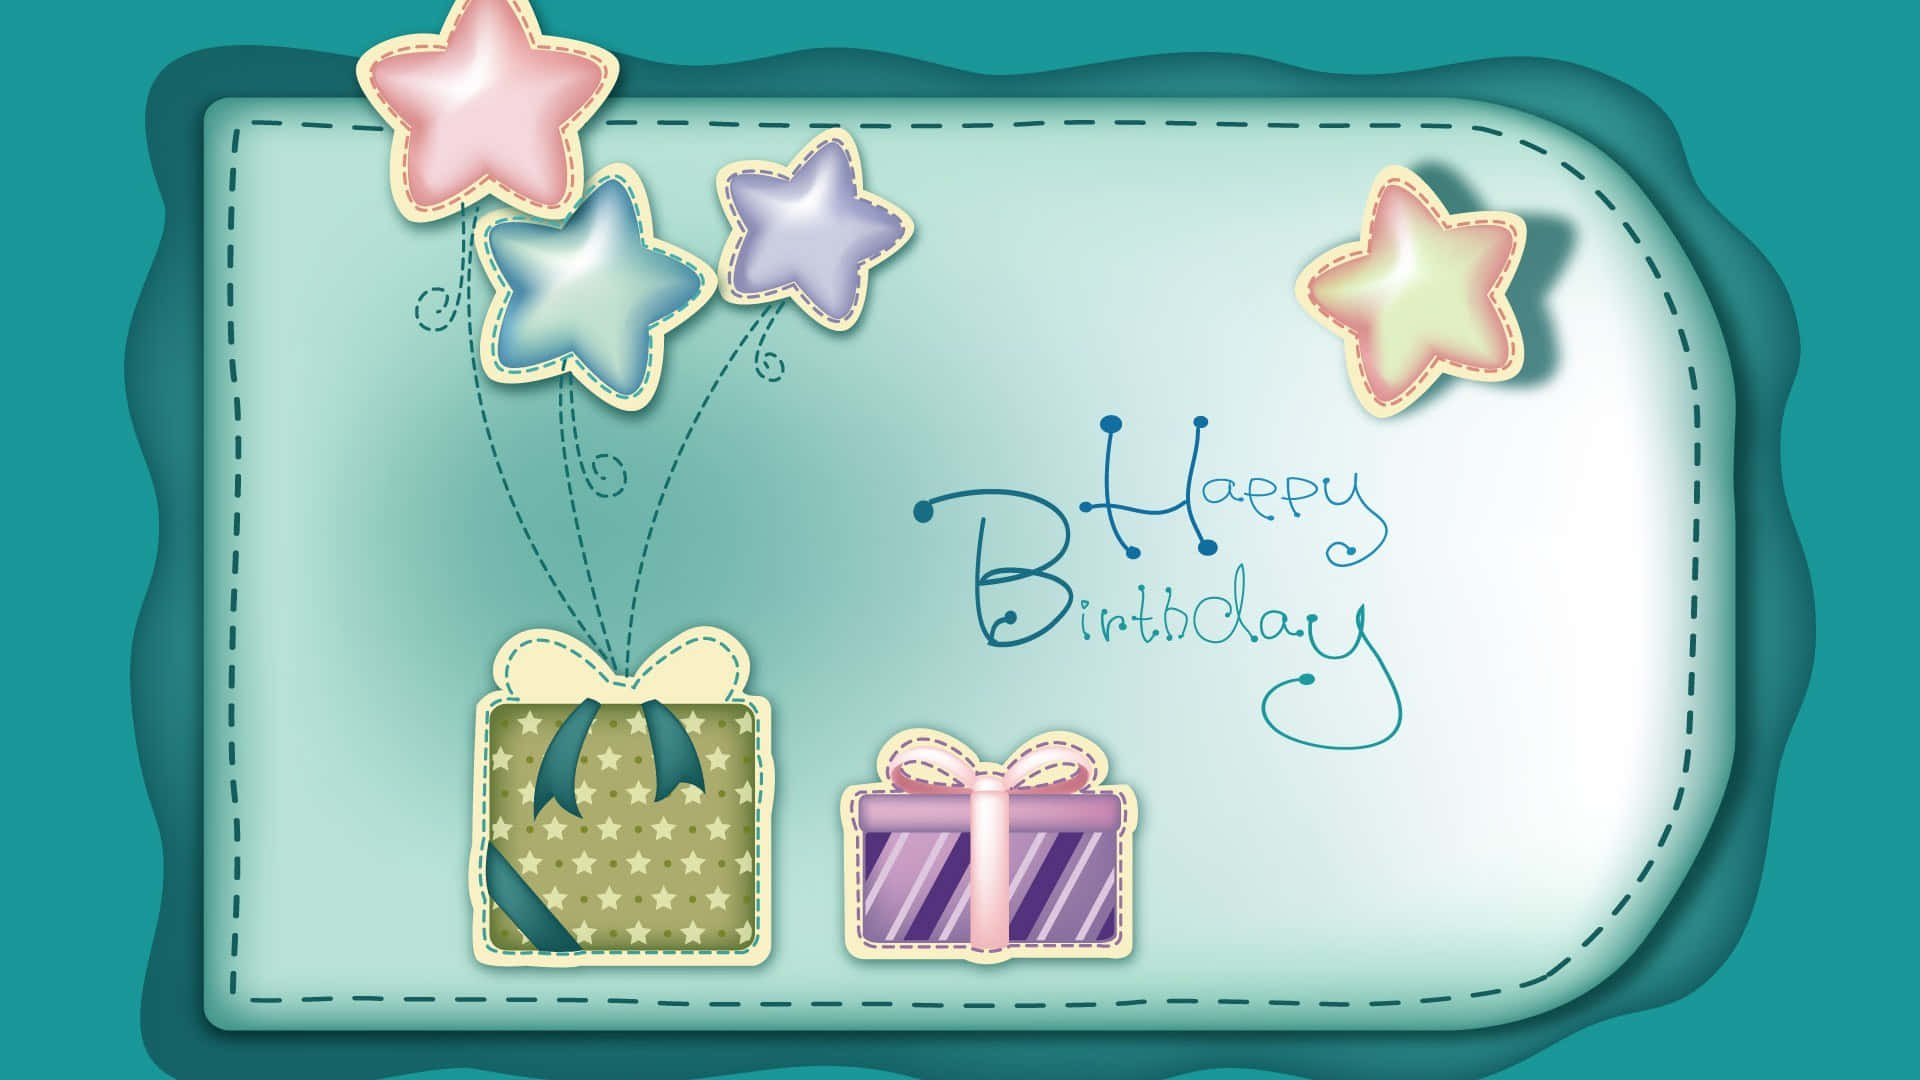 Happy Birthday Card With Gifts And Balloons Wallpaper